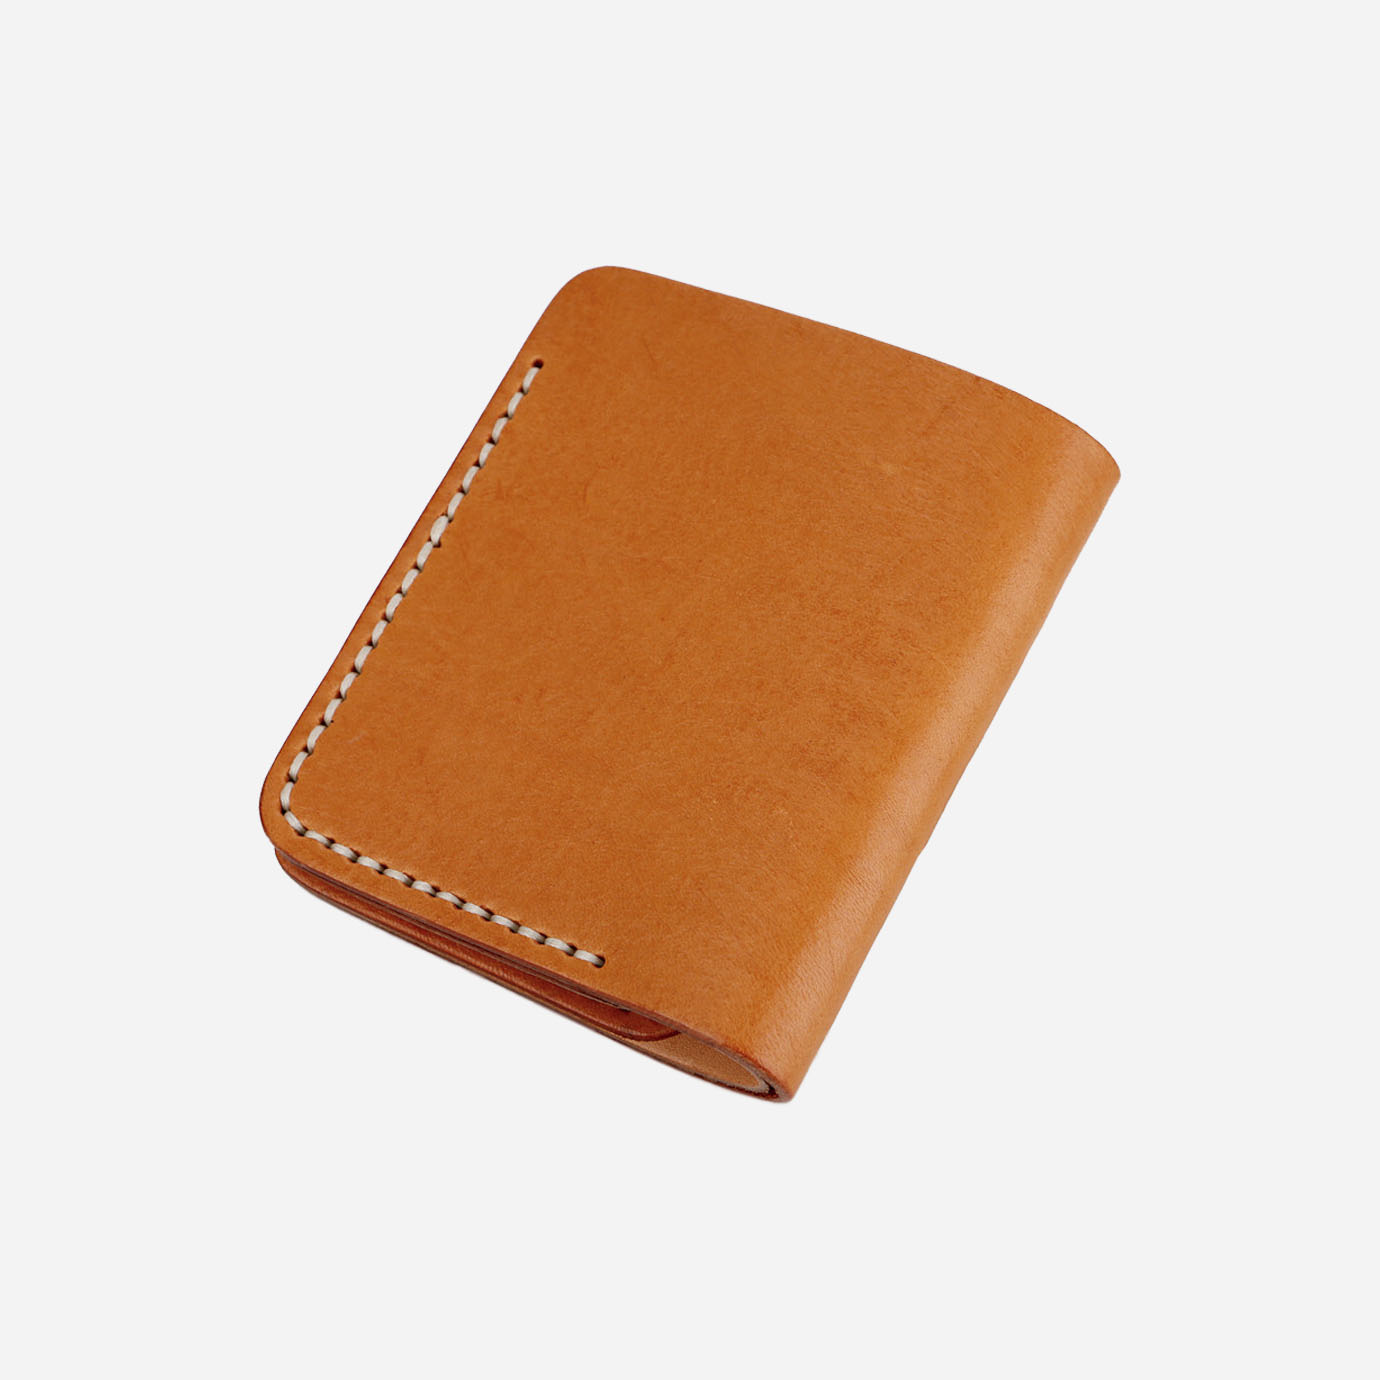 Nordace Note Folio - Leather Wallet